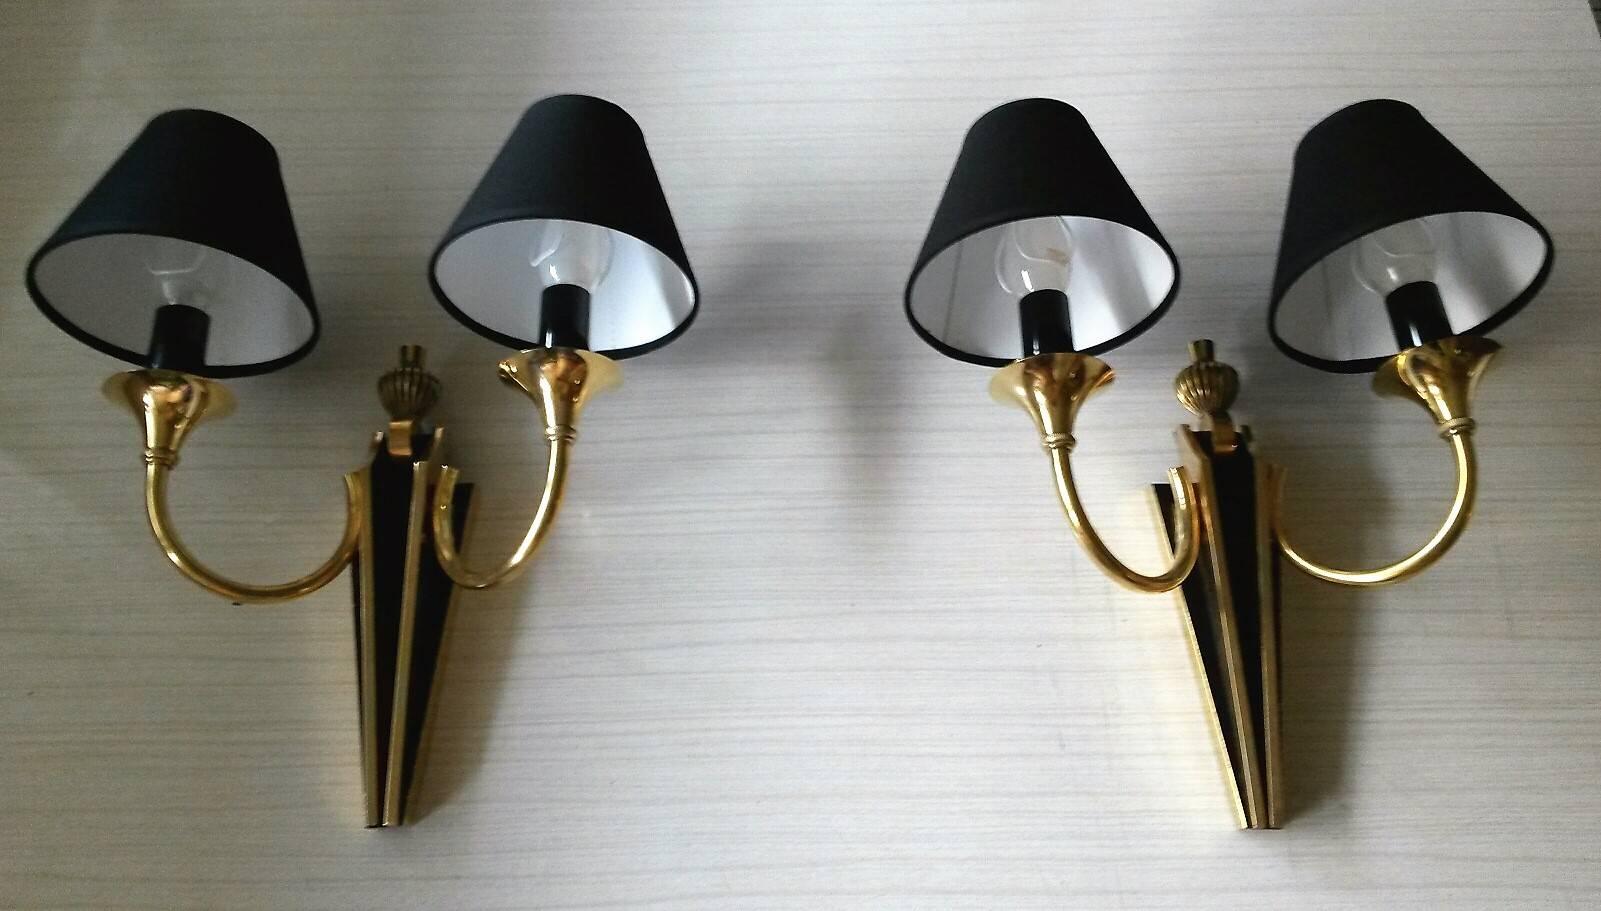 Stunning French Neoclassical Style Pair of Two-Arm Sconces by Maison Jansen For Sale 1